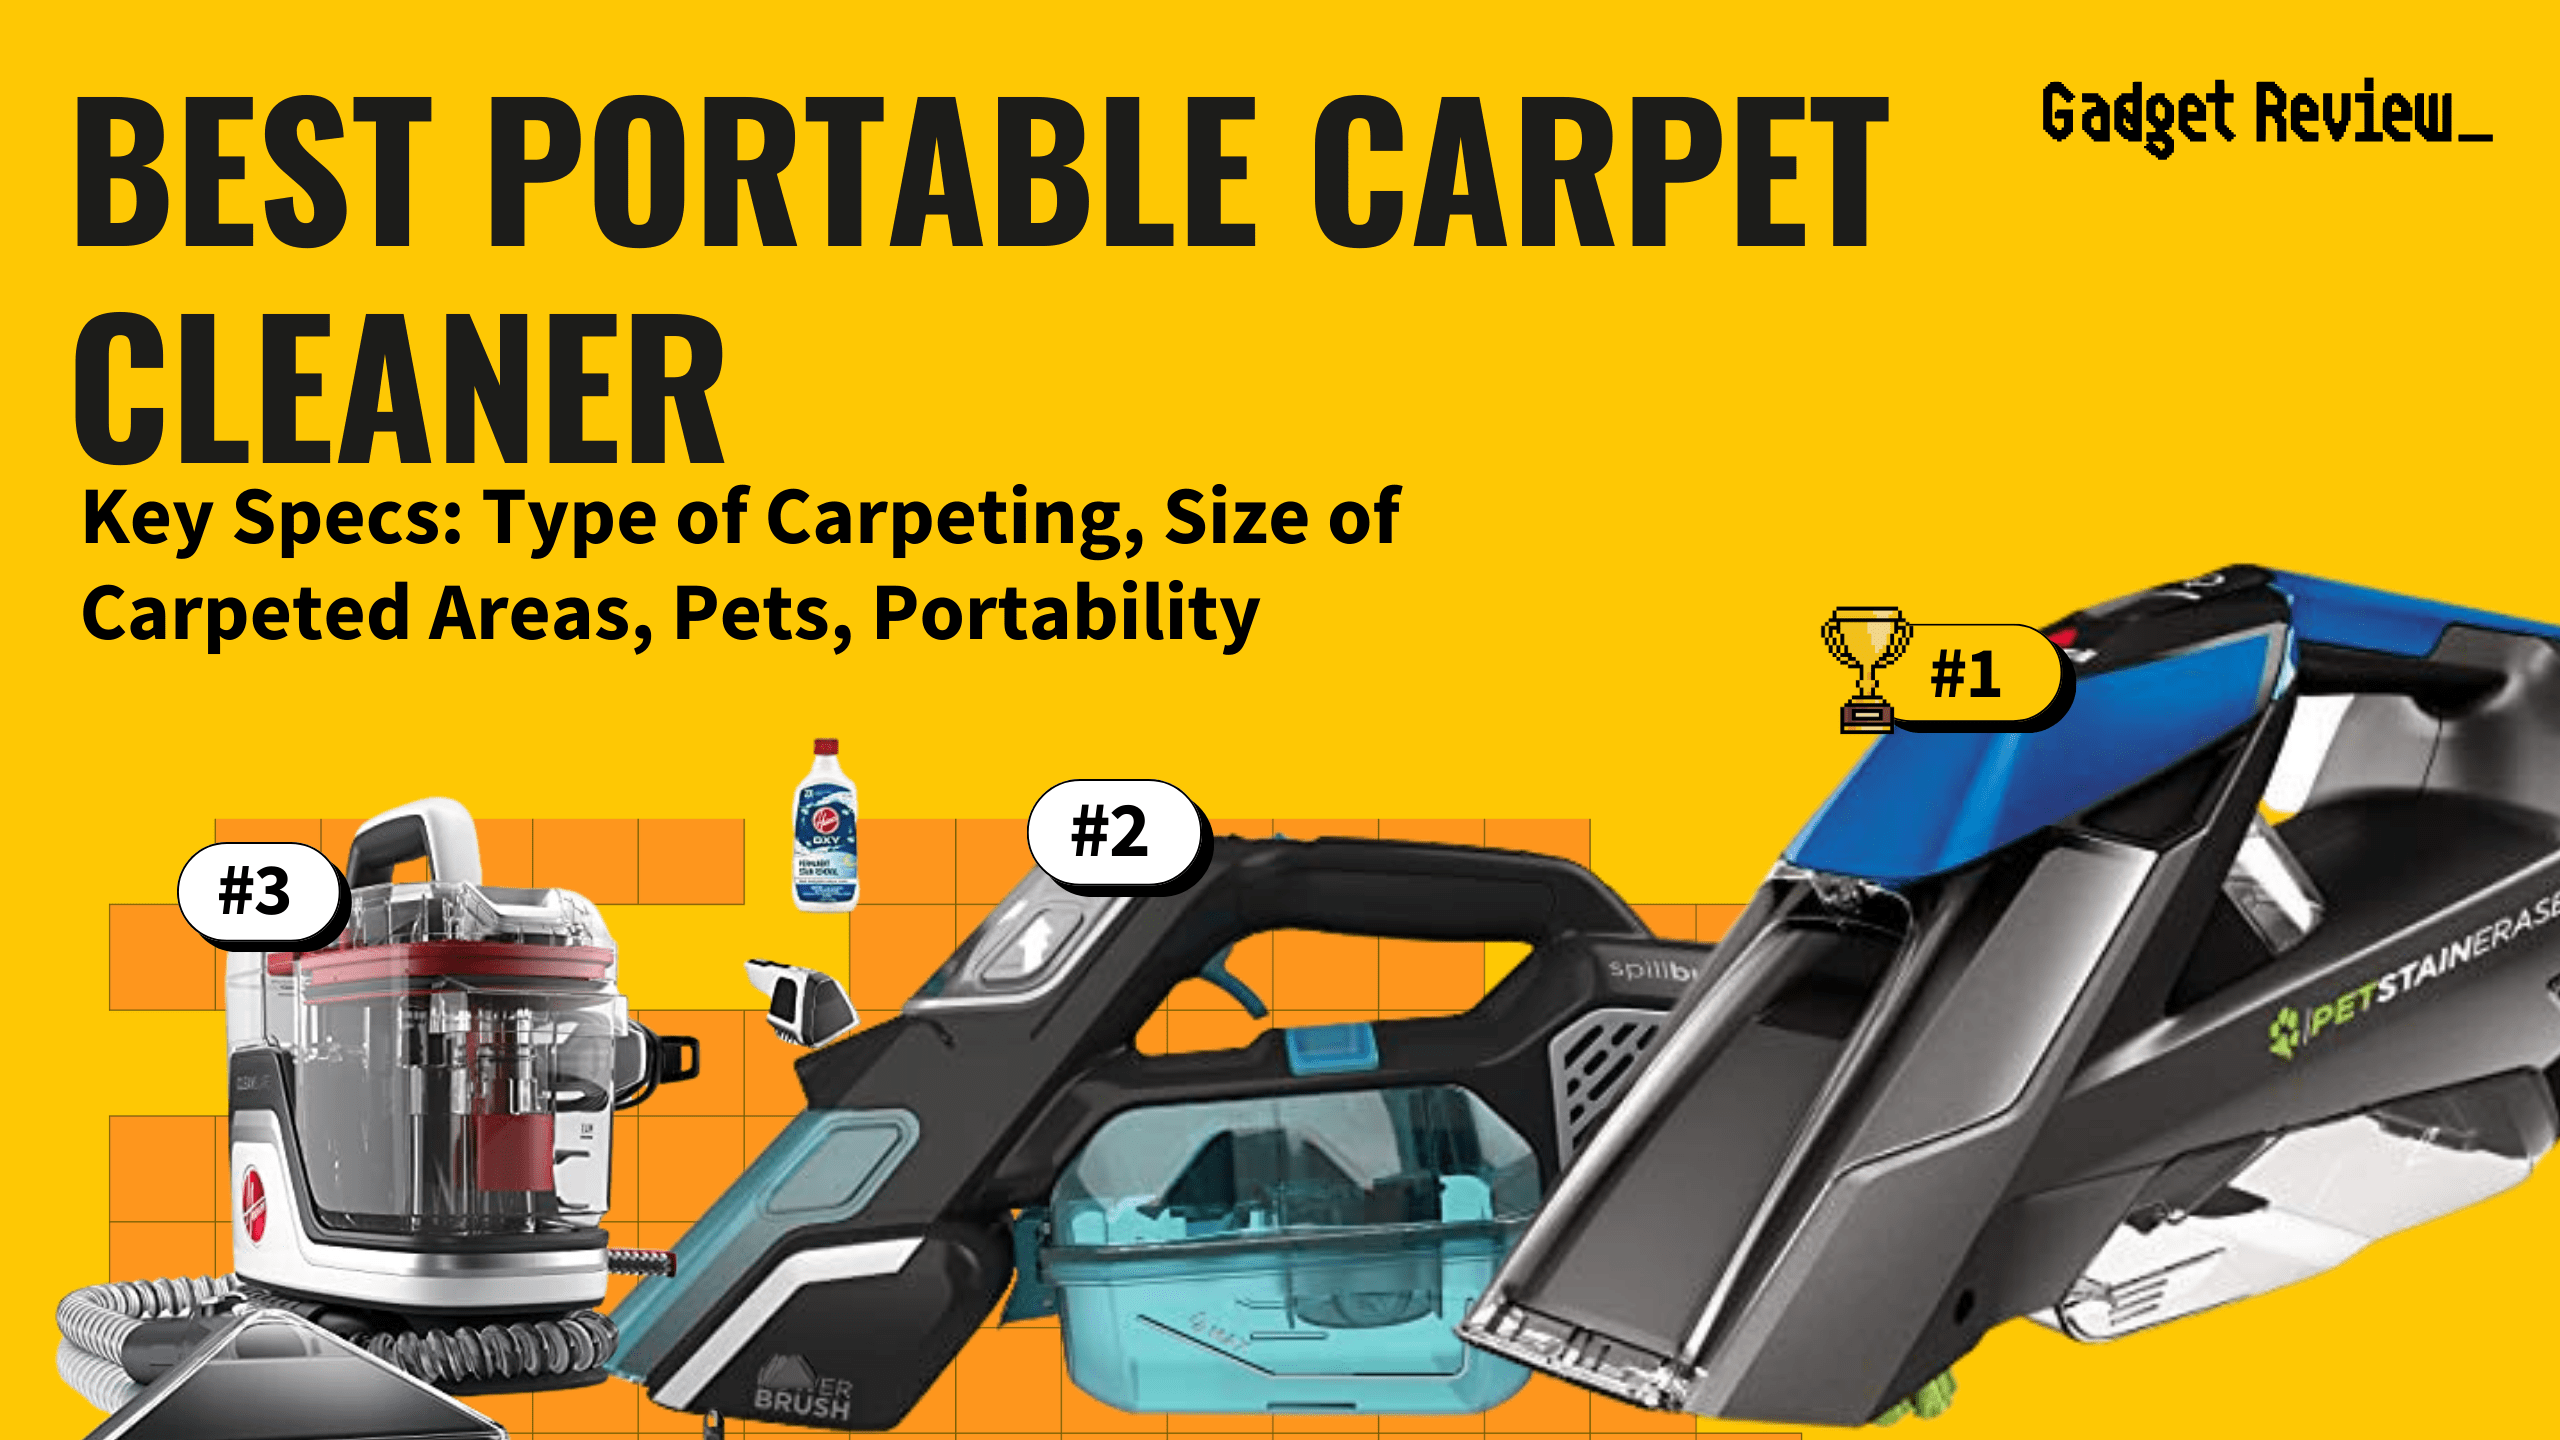 best portable carpet cleaner featured image that shows the top three best vacuum cleaner models